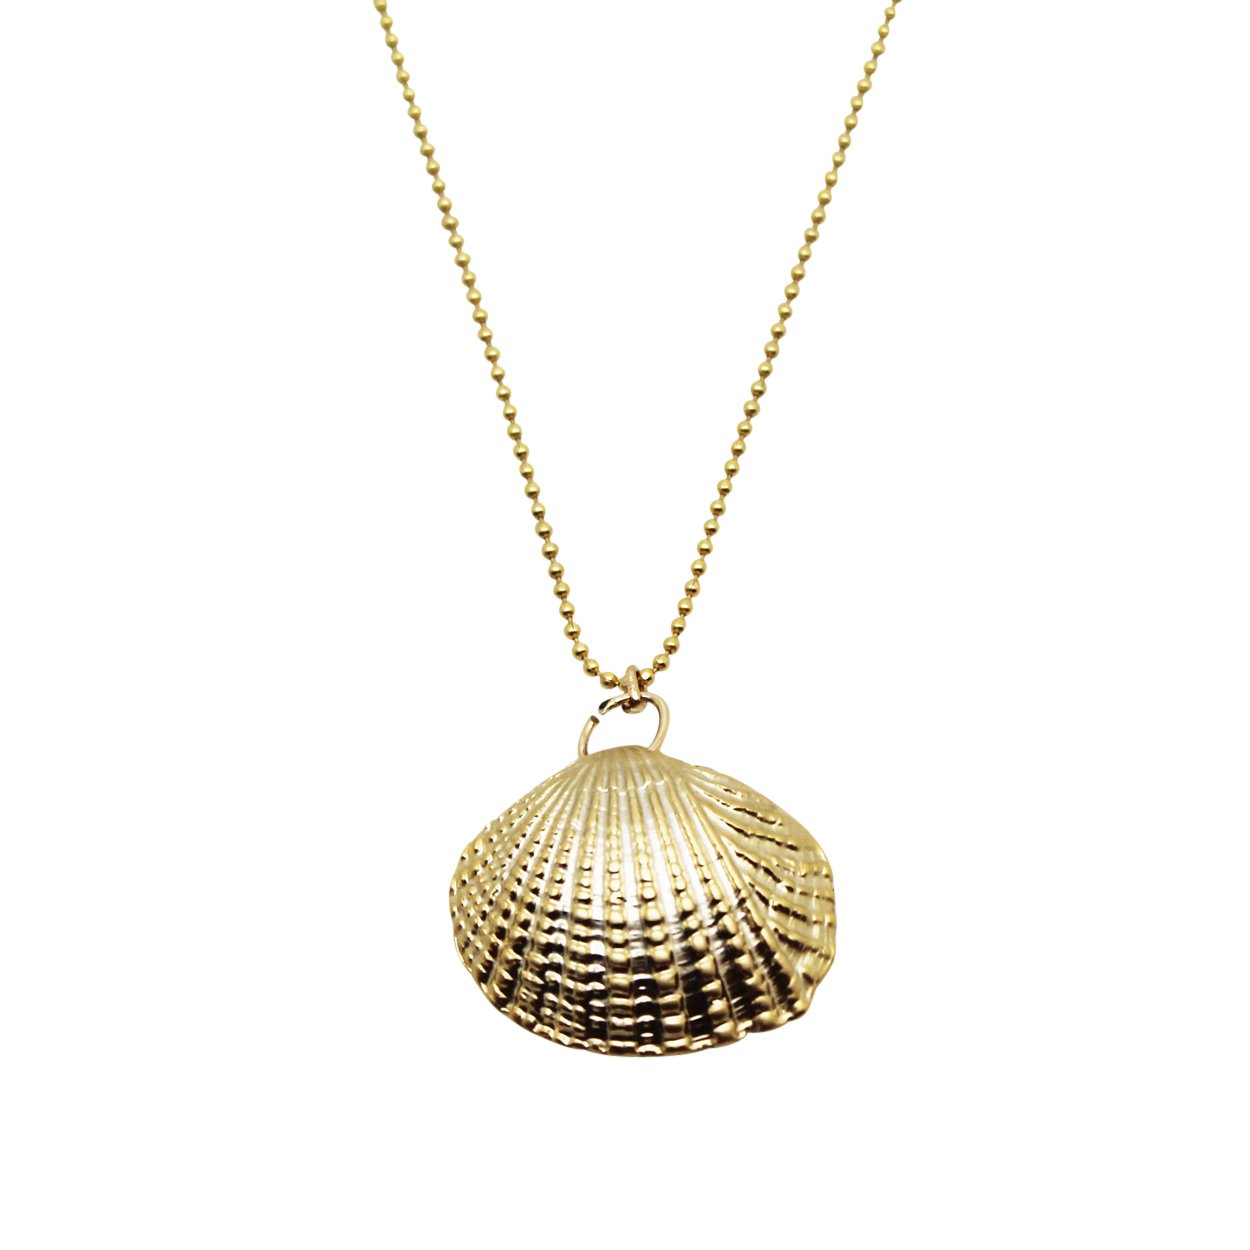 Shell Necklace - Gold - The Bucket List Studios